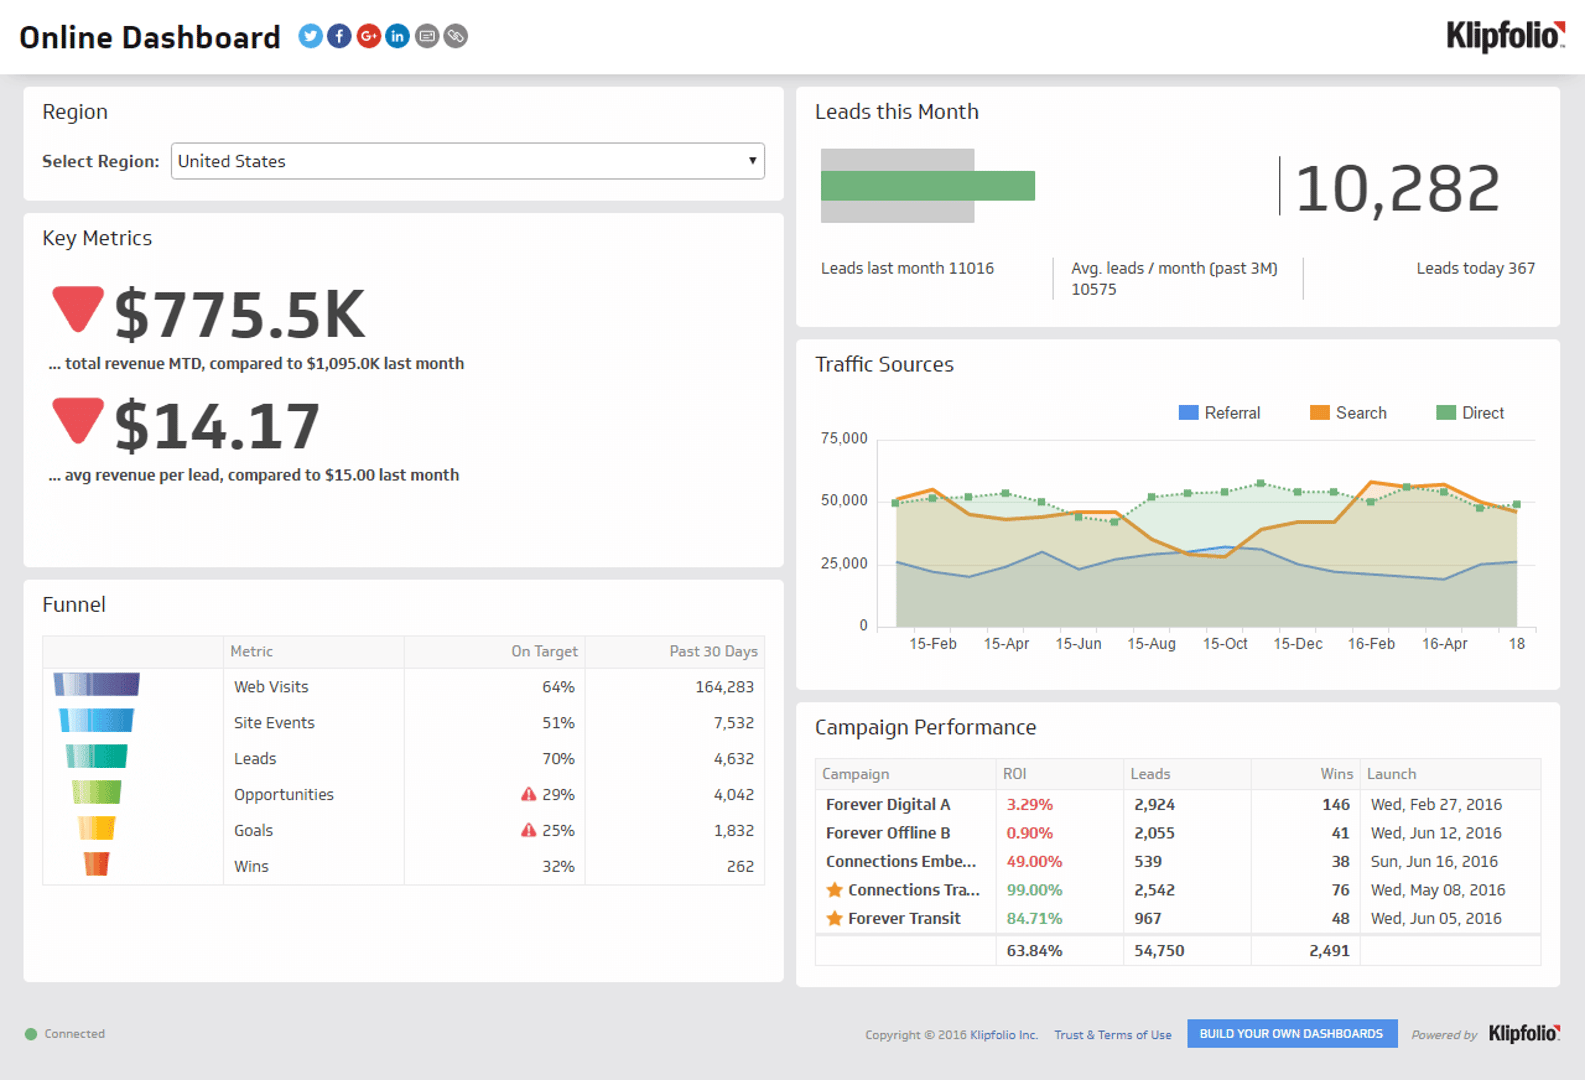 Related Dashboard Examples - Online Dashboard